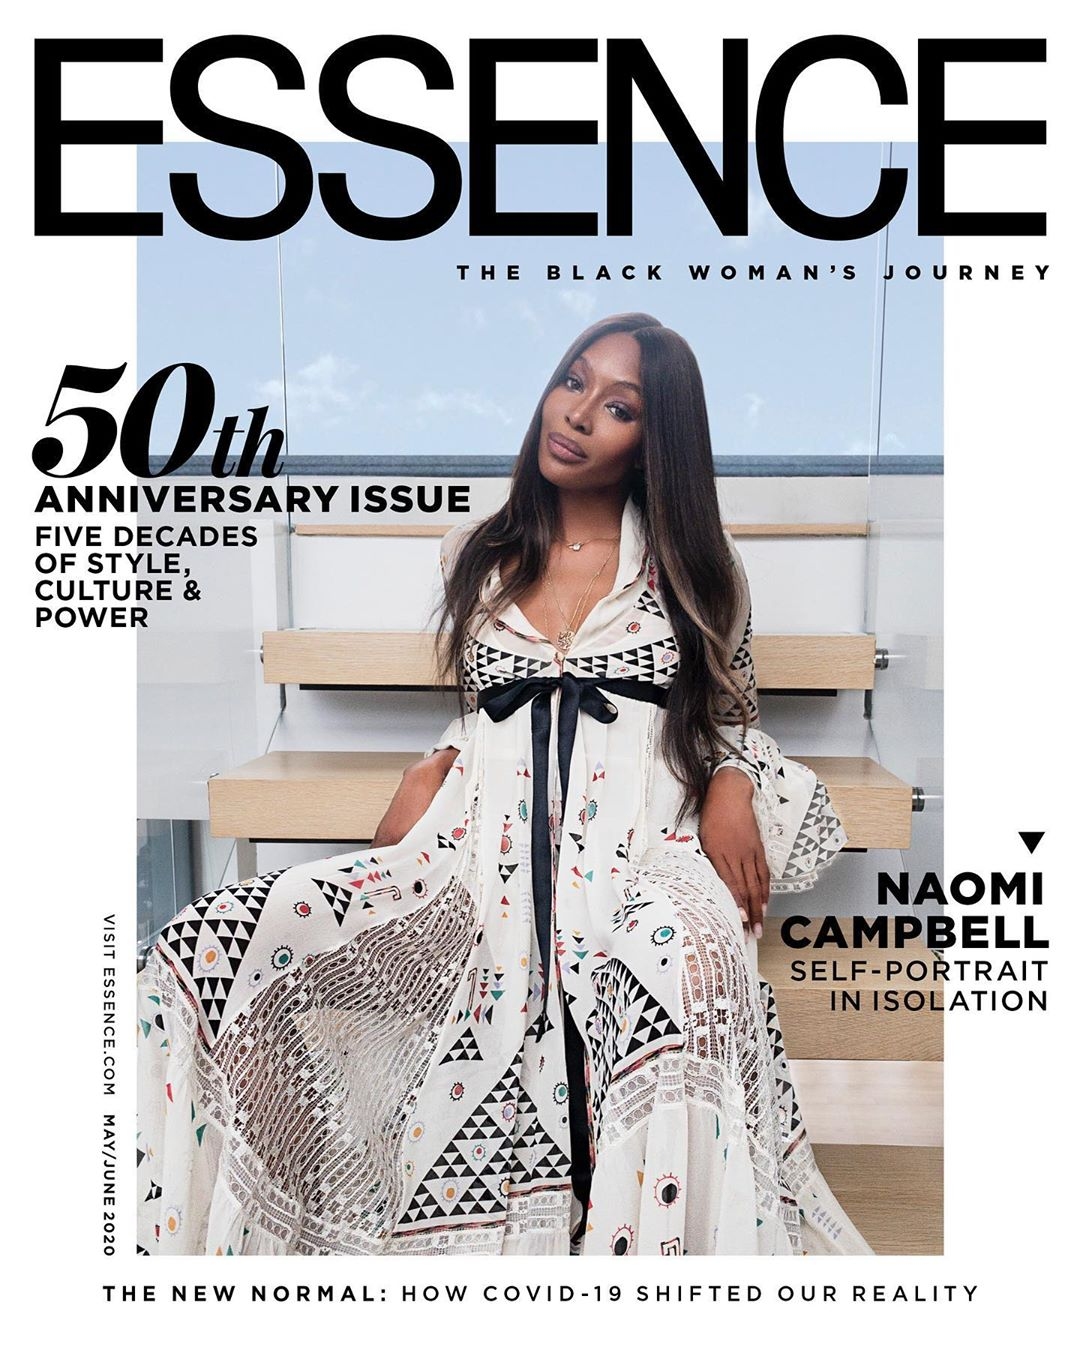 Naomi Campbell photographs herself for Essence 5Oth anniversary cover